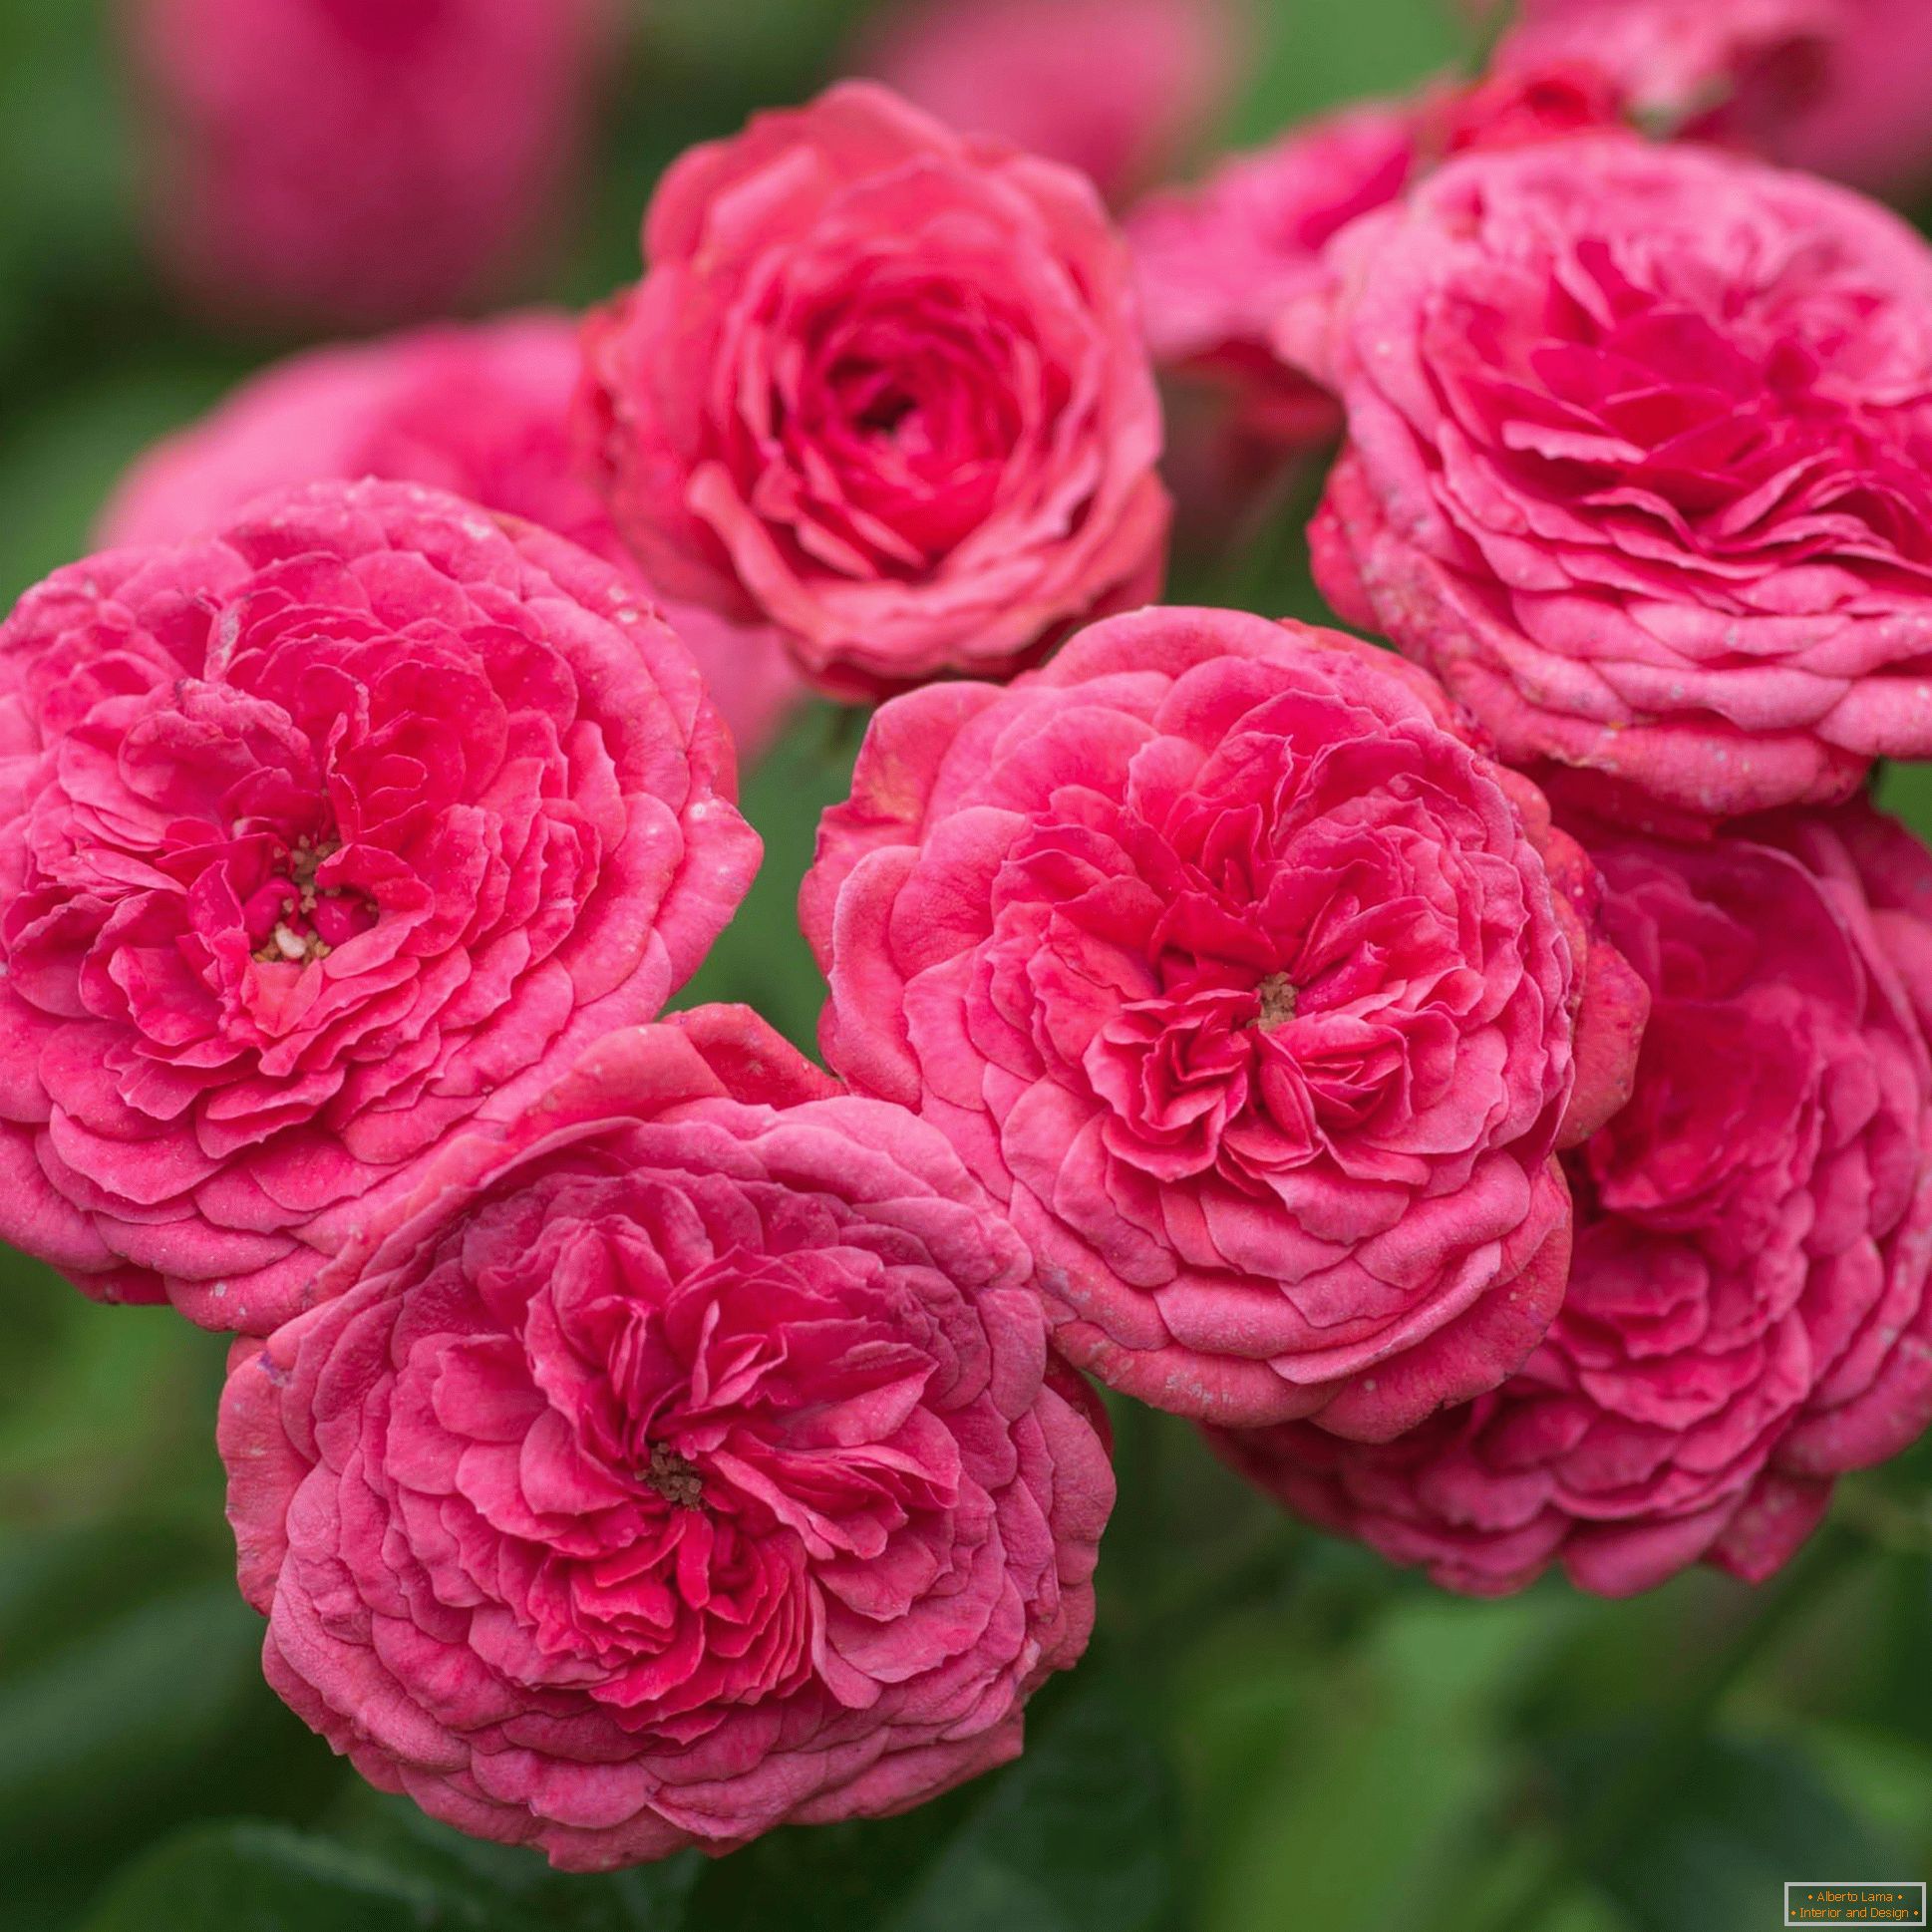 Bright pink double roses